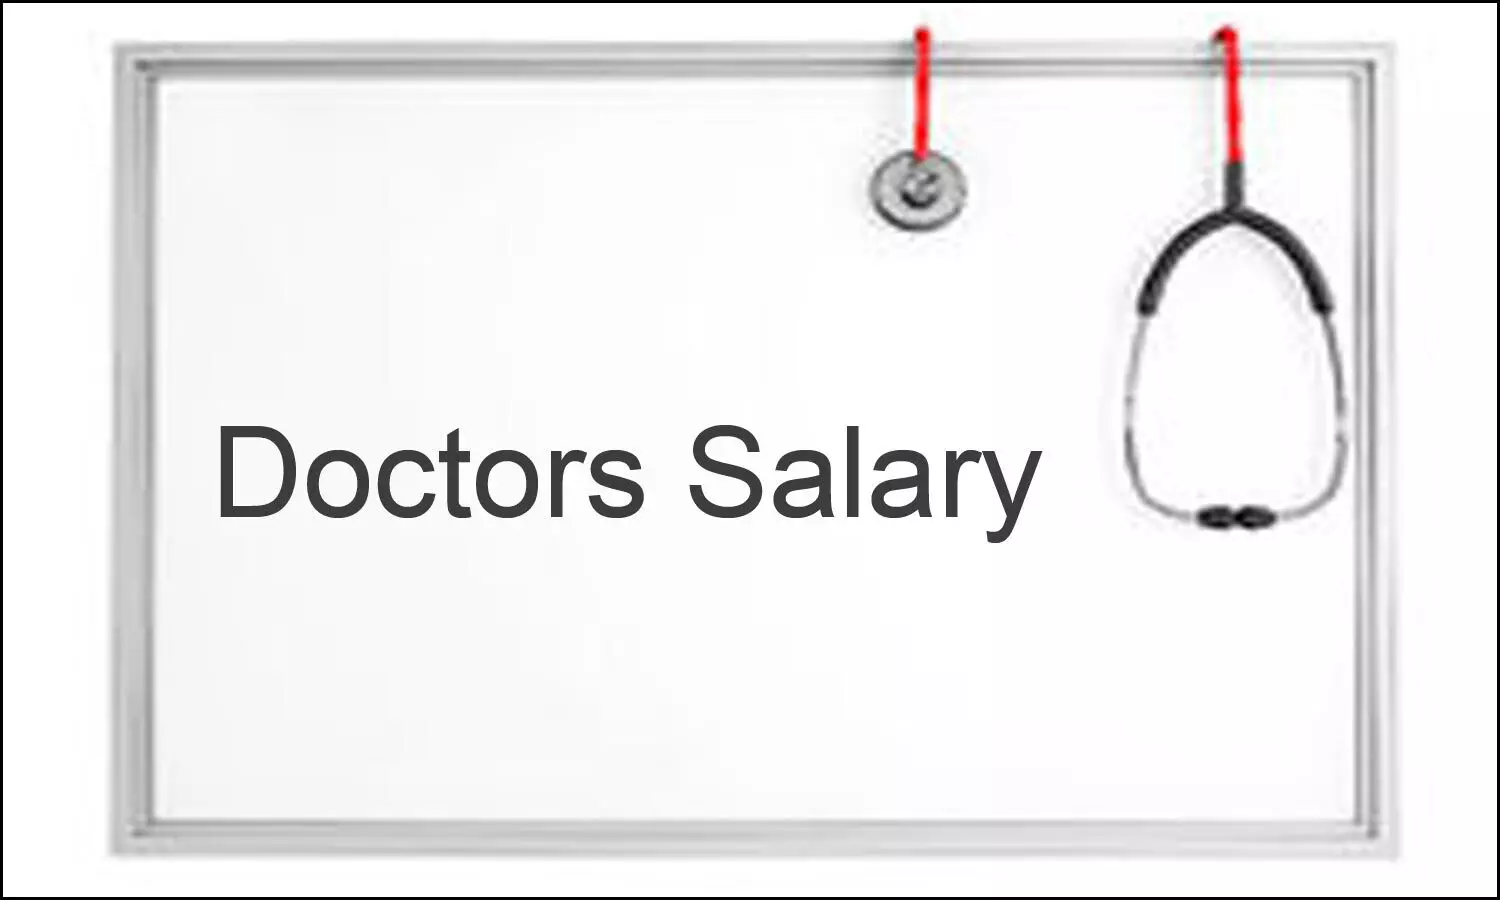 Rs 15,000 hike for Contractual MBBS doctors in Karnataka